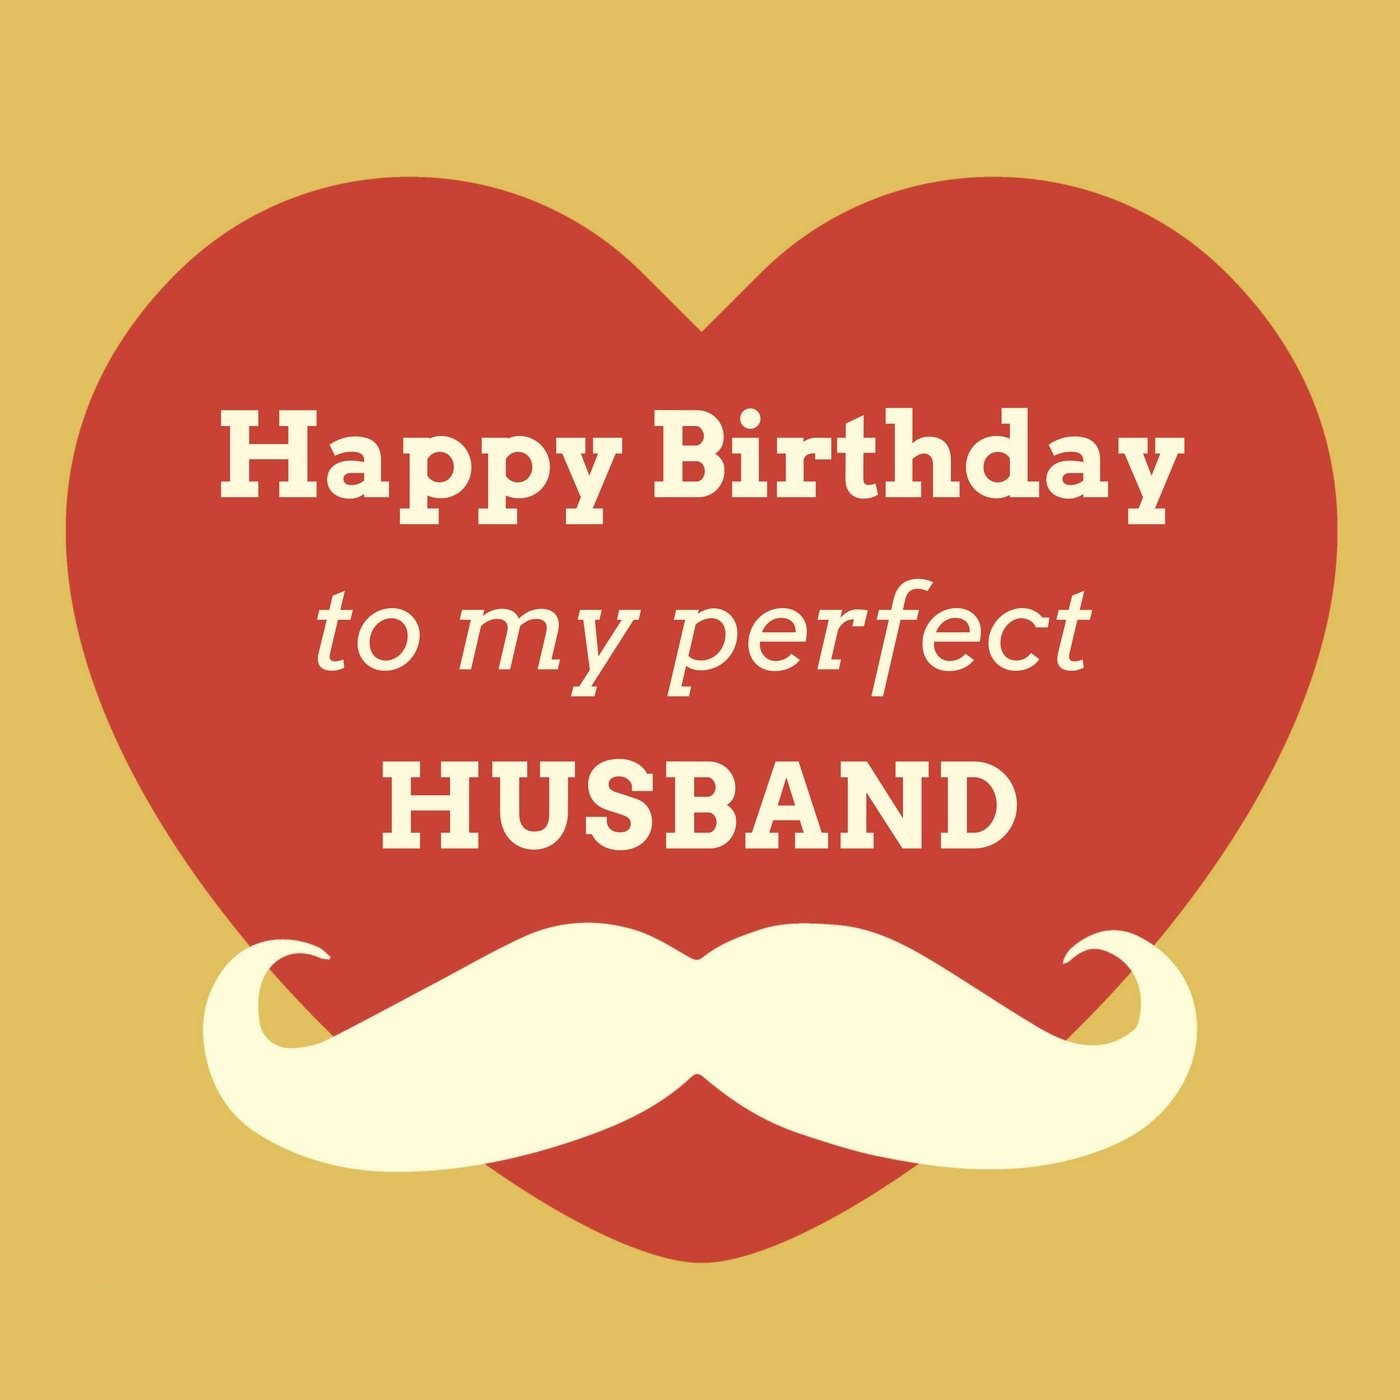 Happy Birthday Quote For Husband
 Funny Birthday Wishes for Husband Funny Birthday